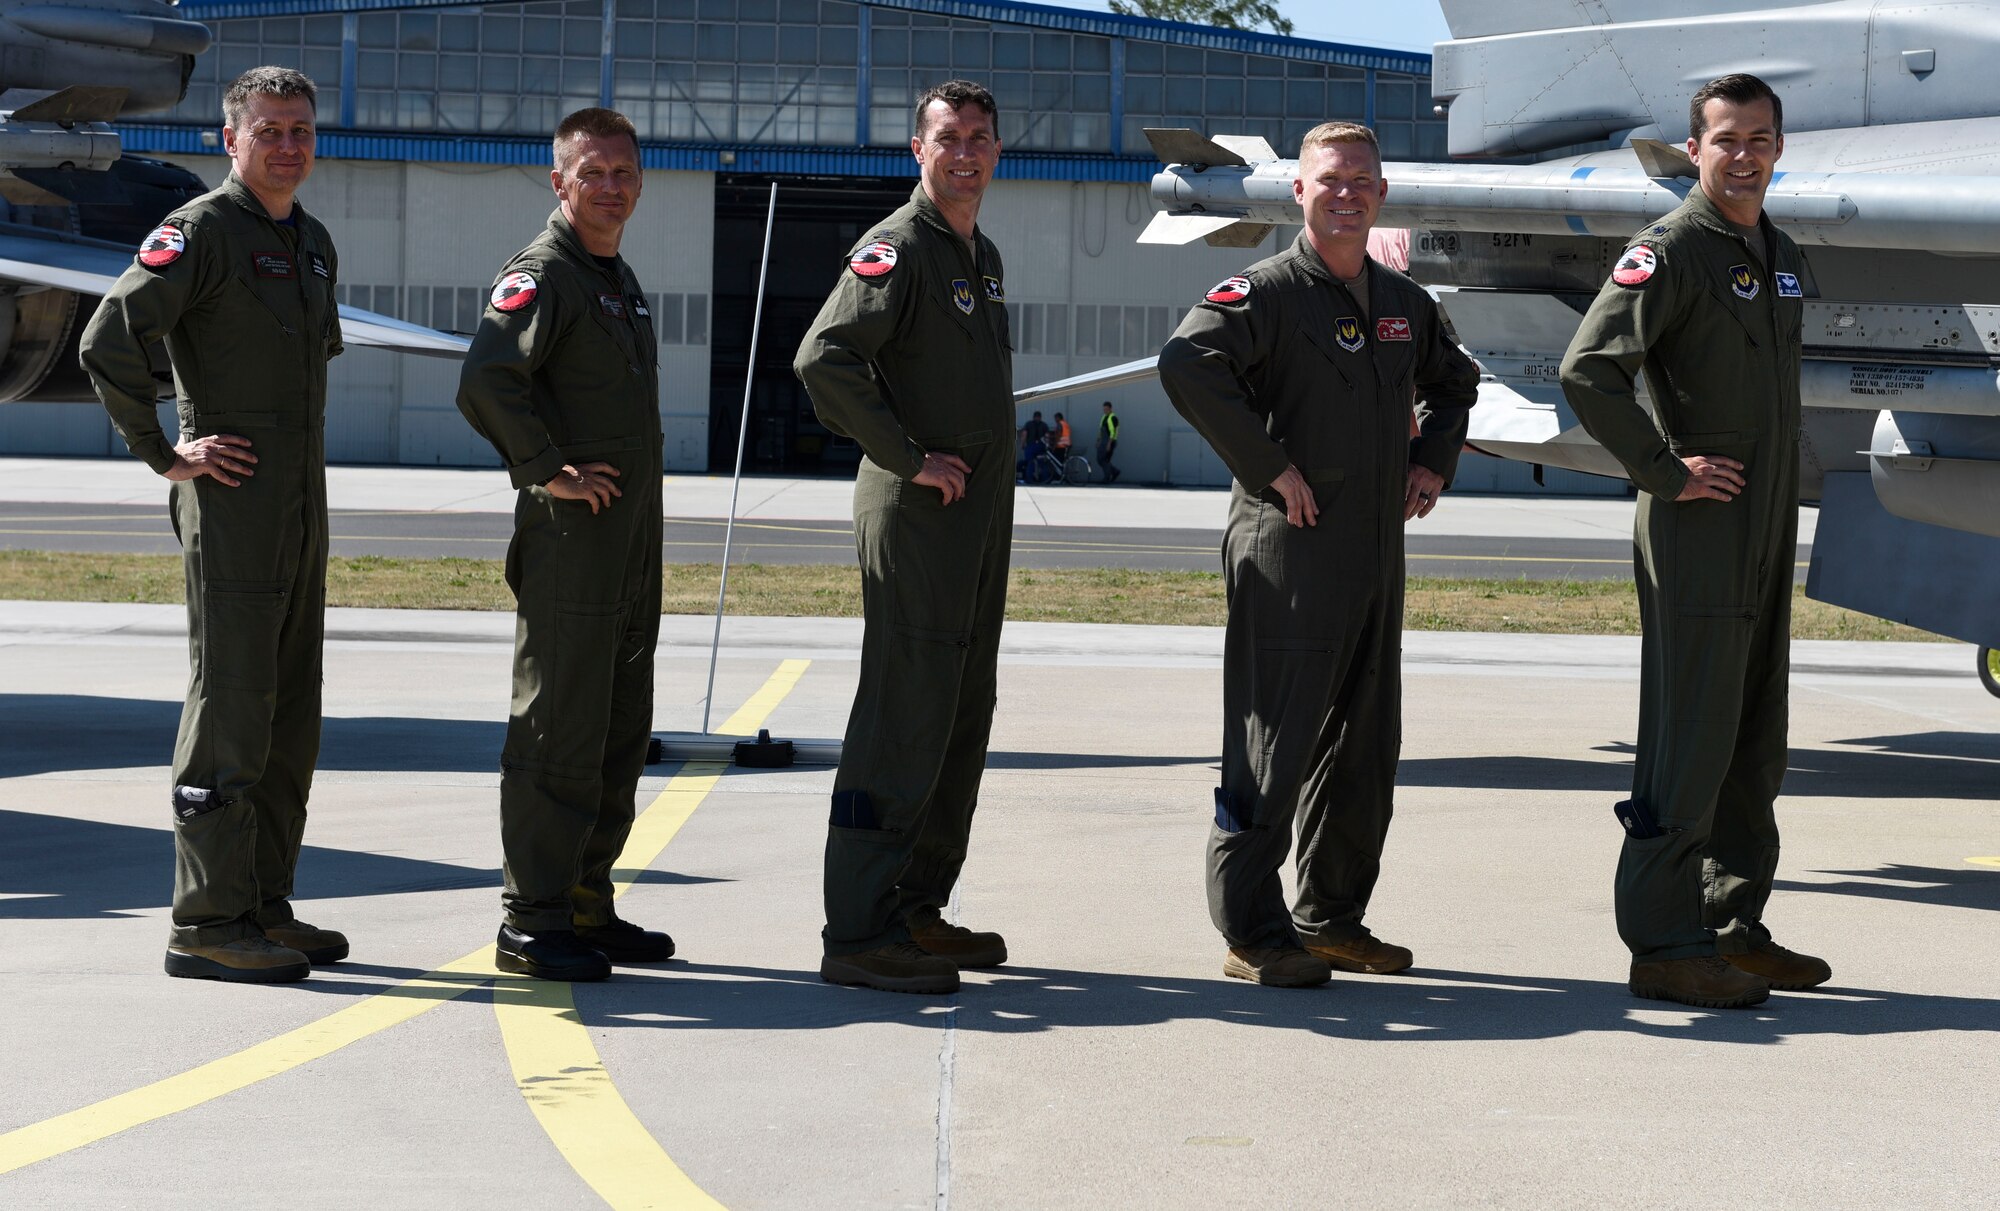 Starting far left, Polish Air Force Col. Tomasz Jatczak, 32nd Tactical Air Base commander, Brig. Gen. Iteneusz Nowak, 2nd Tactical Air Wing commander, U.S. Air Force Col. David Epperson, 52nd Fighter Wing commander, Lt. Col. Patrick Kennedy, 480th Expeditionary Fighter Squadron commander, and Lt. Col. Albert Roper, 52nd Operations Group Detachment One commander, stand in front of a static display for brief interviews at Łask AB, Poland, August 21, 2020. During Aviation Detachment Rotation 20.4, the Polish and U.S. forces will be flying, training and learning together as they work to foster regional security and prosperity. (U.S. Air Force photo by Senior Airman Melody W. Howley)